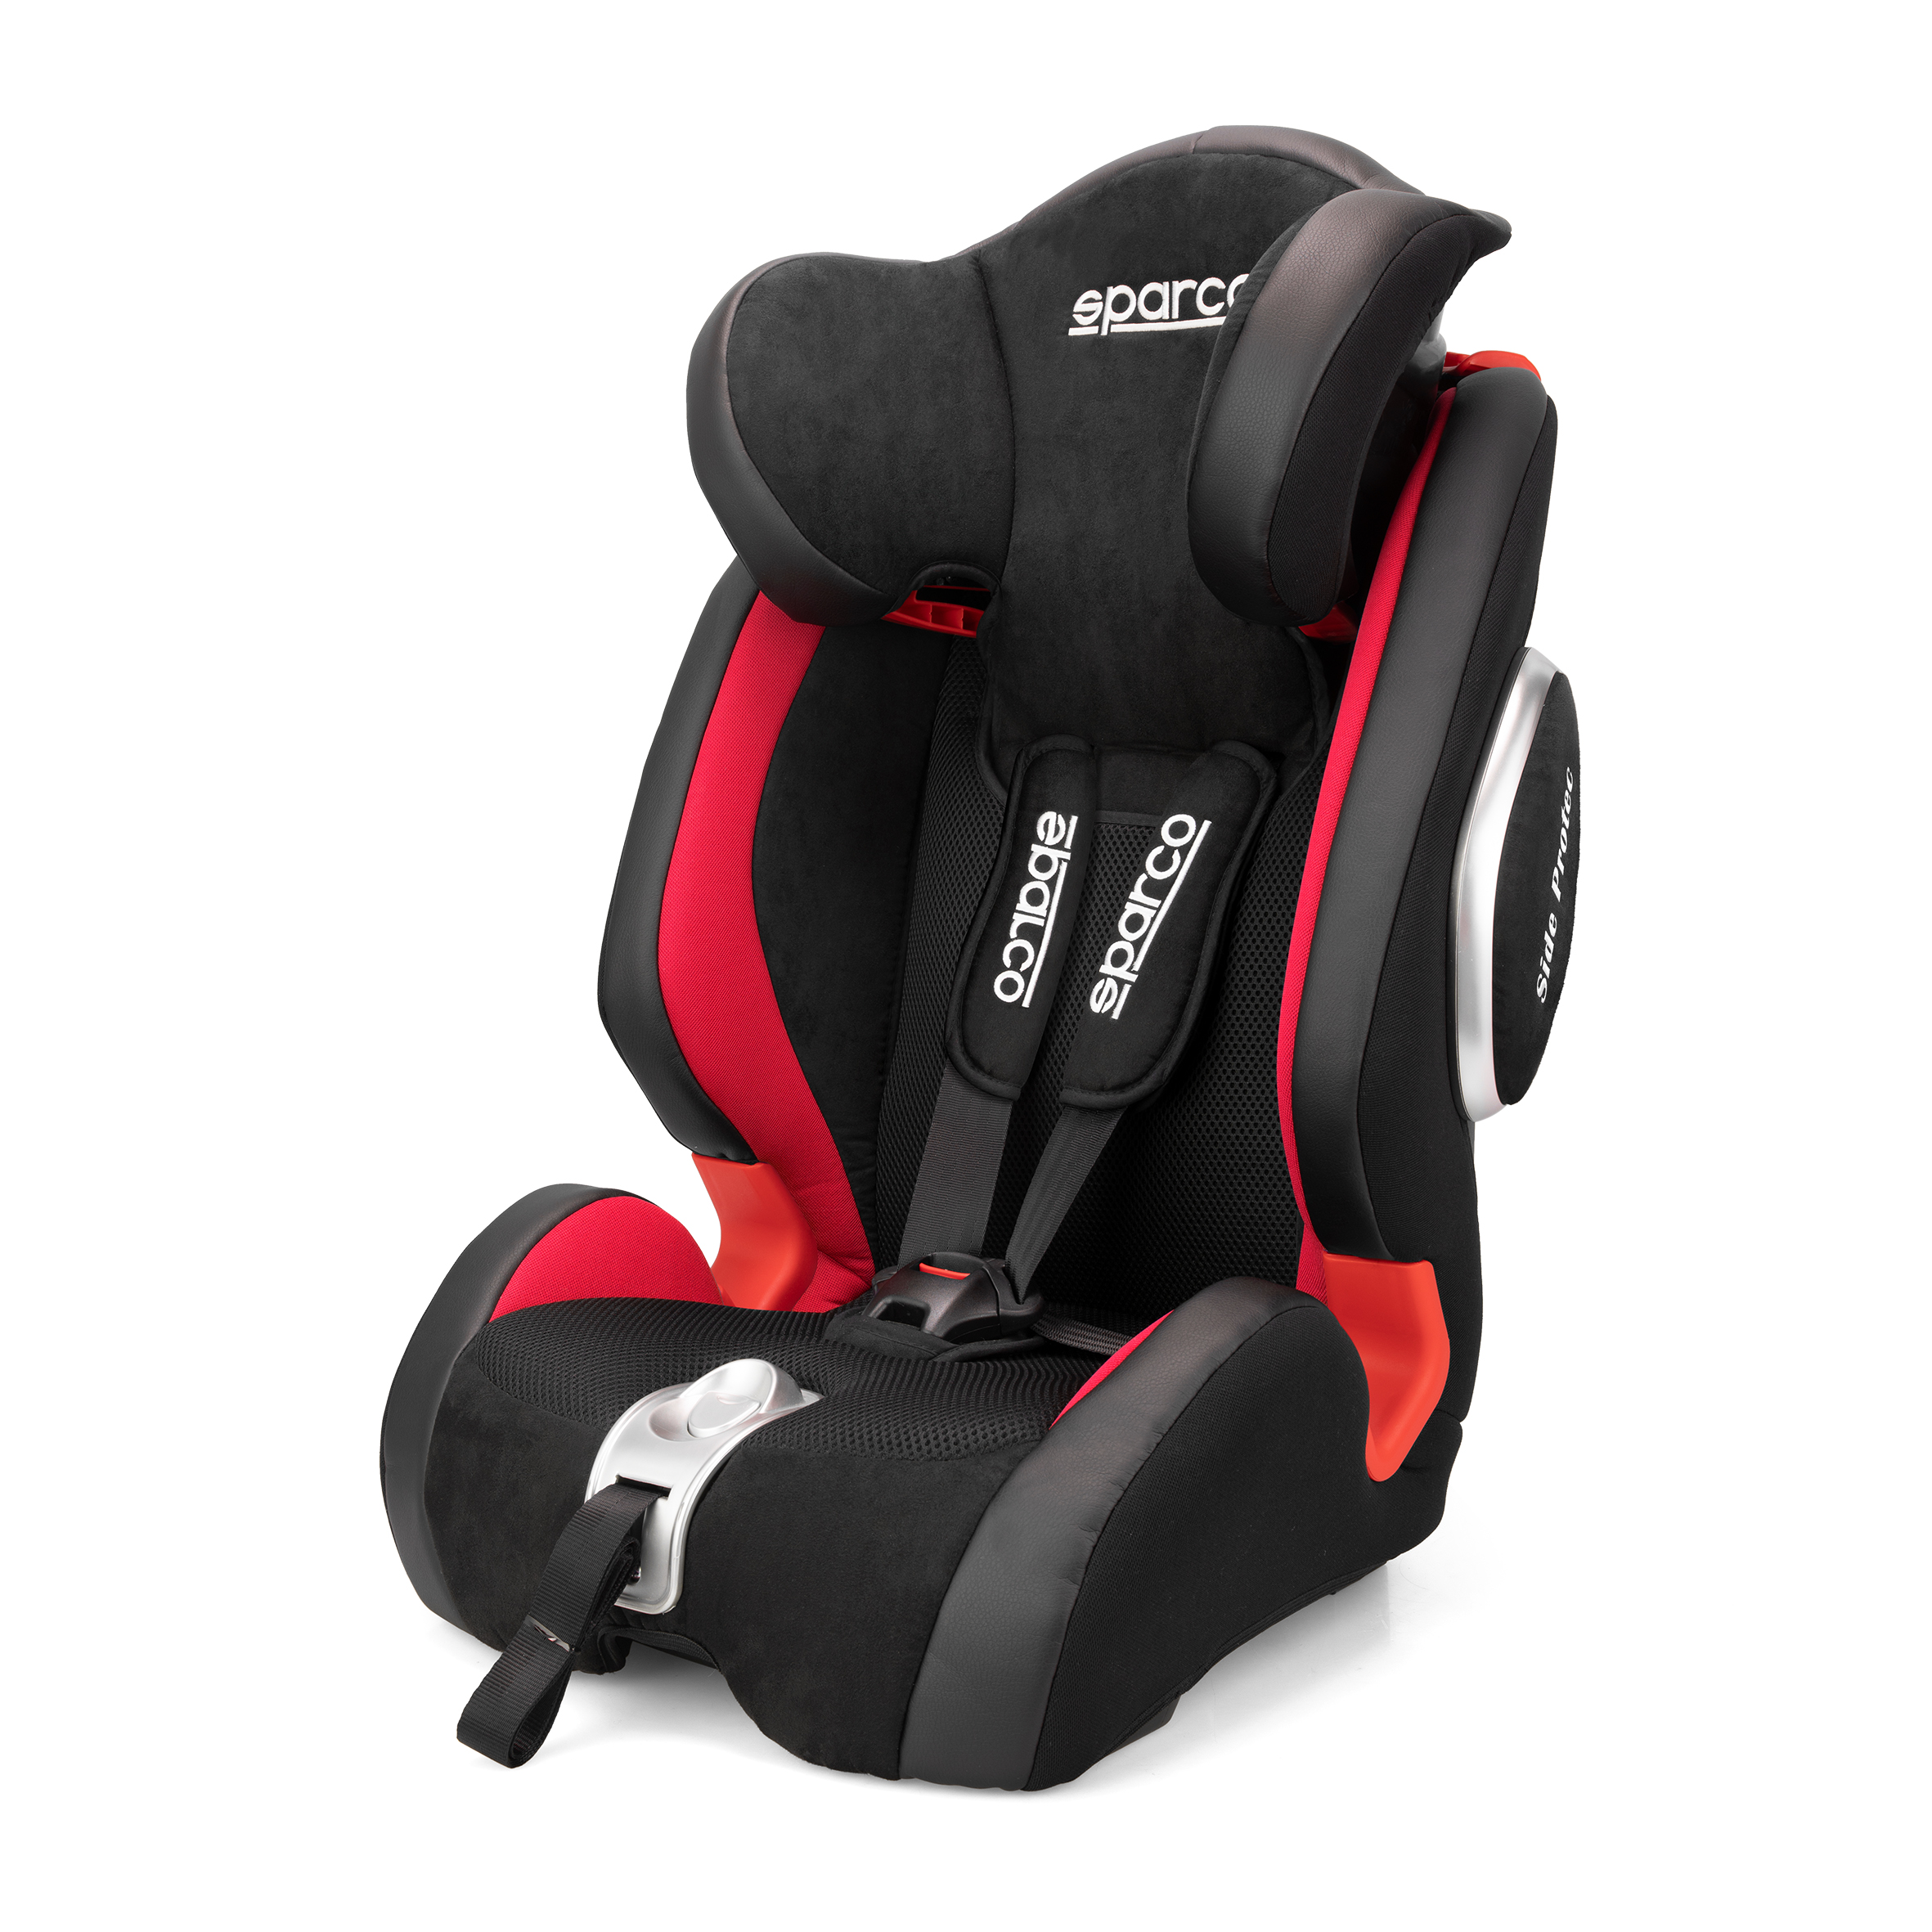 Category: Car seats - Sparco Kids